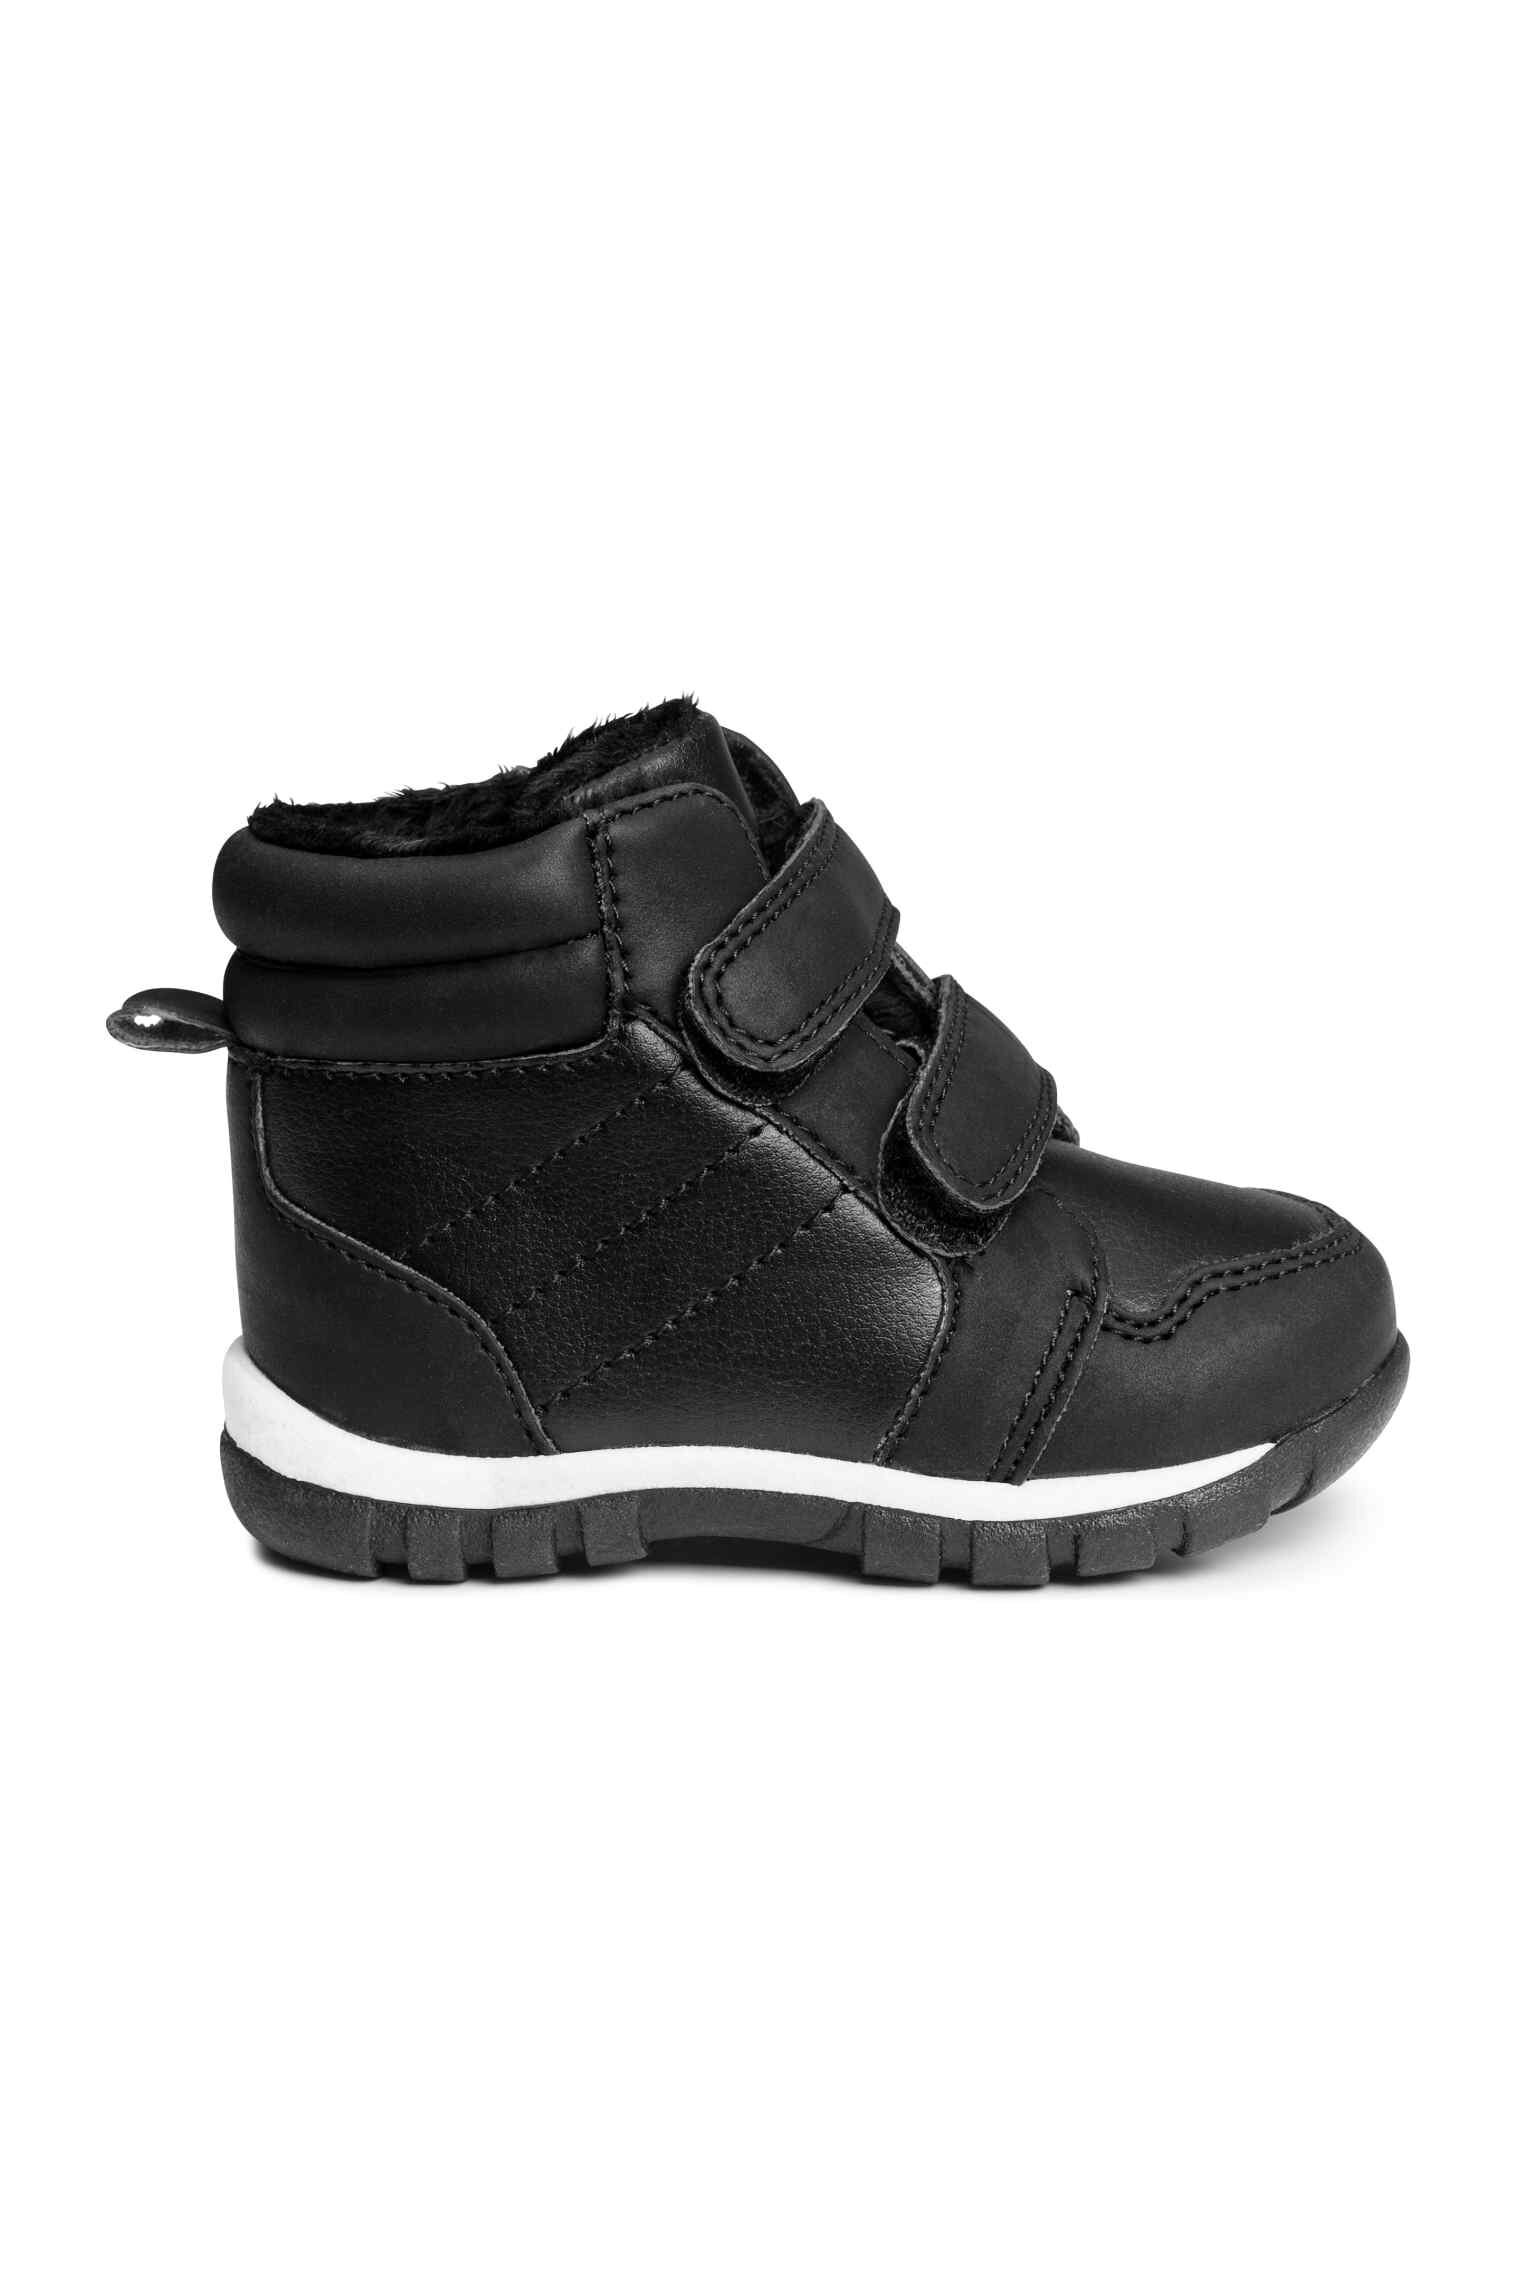 H&M Warmlined High Tops — UFO No More